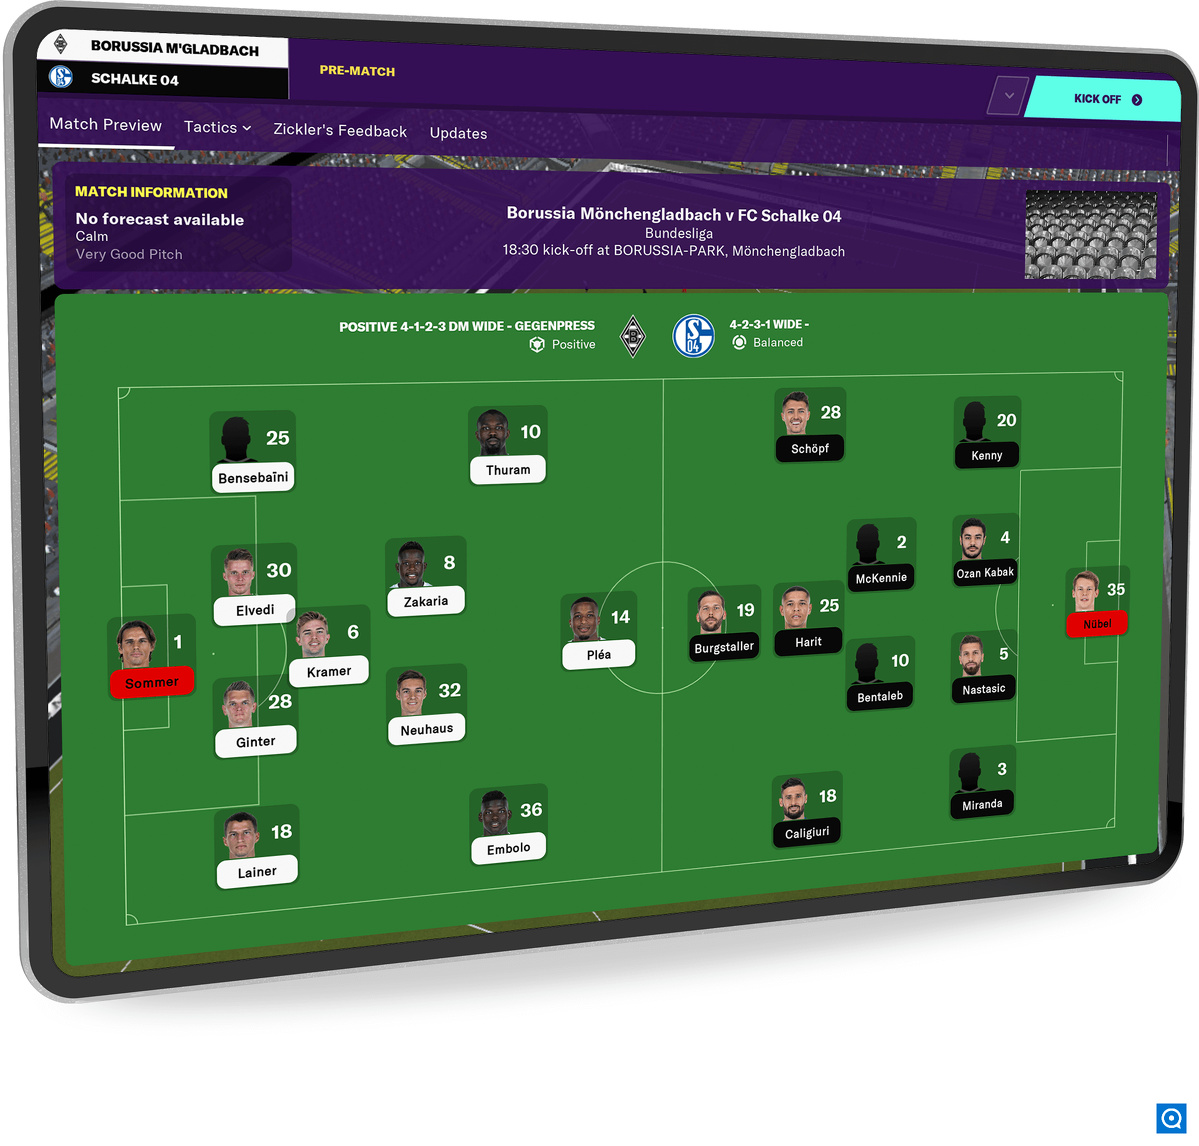 Football Manager 2012 1.0 : Watch or simulate your matches